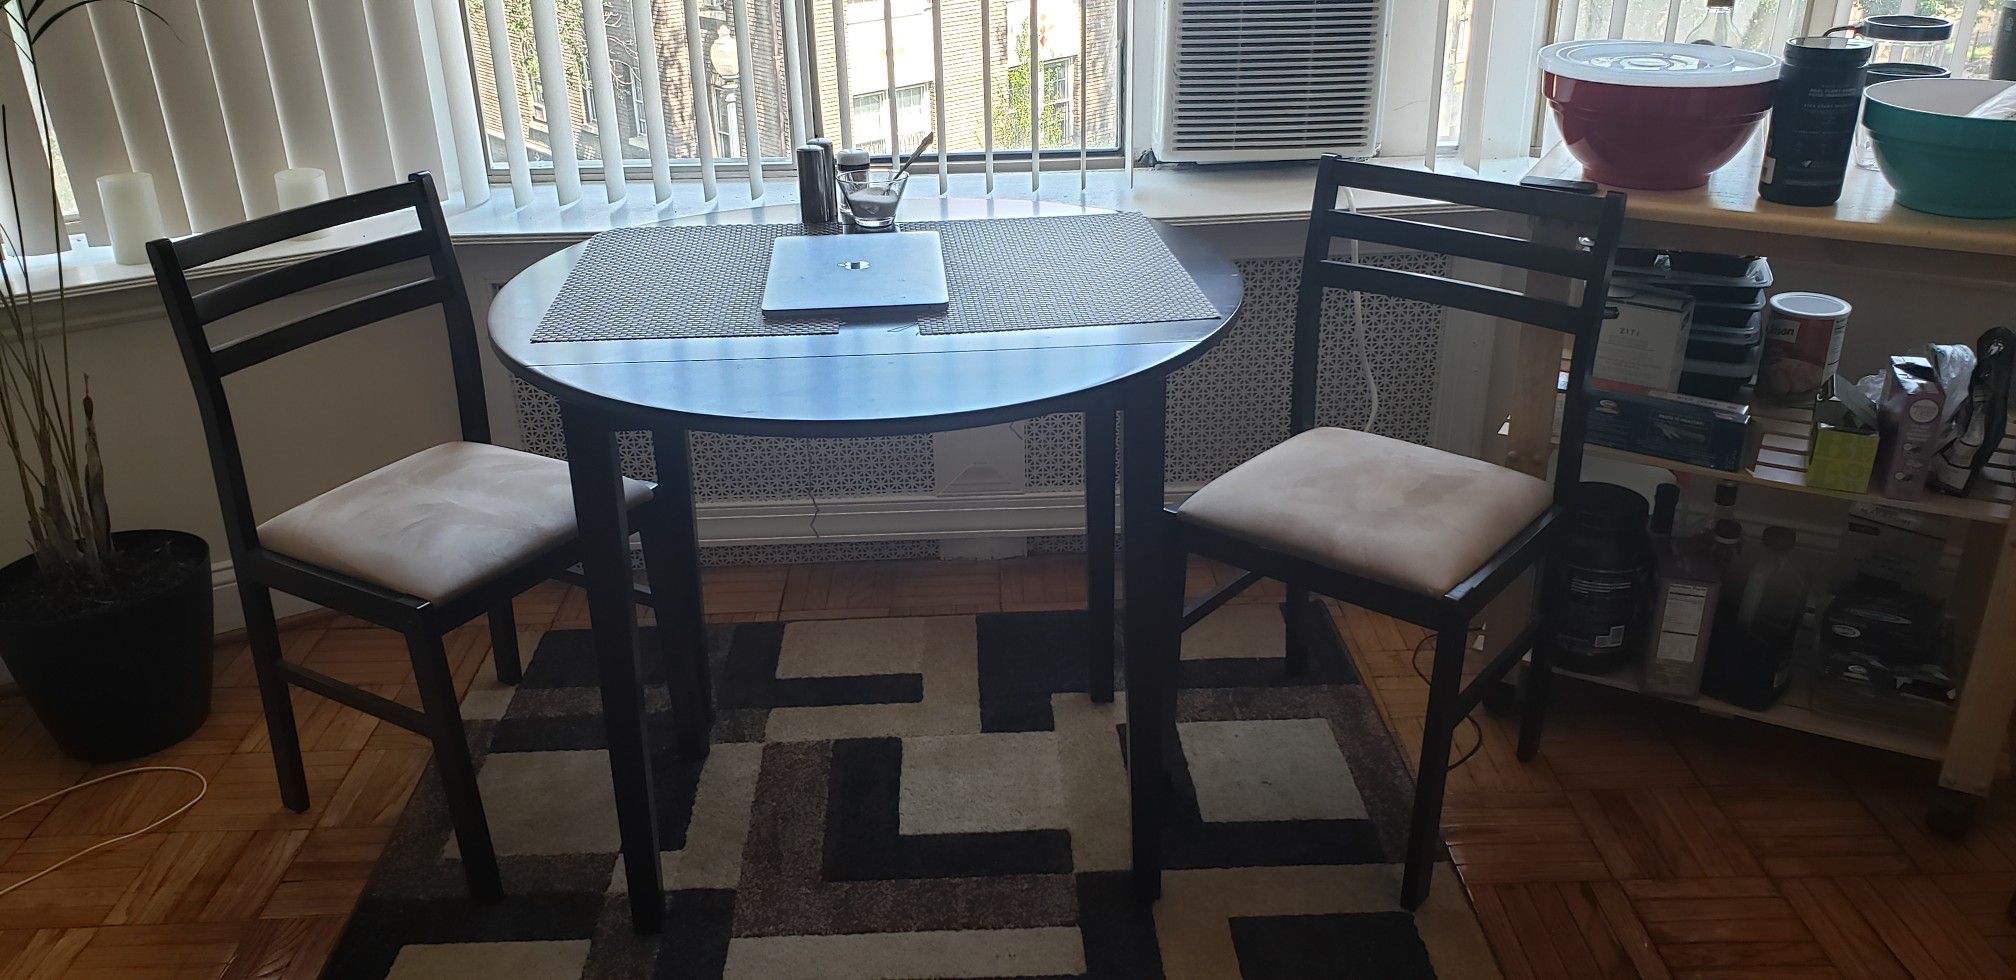 Small kitchen table with 2 seats